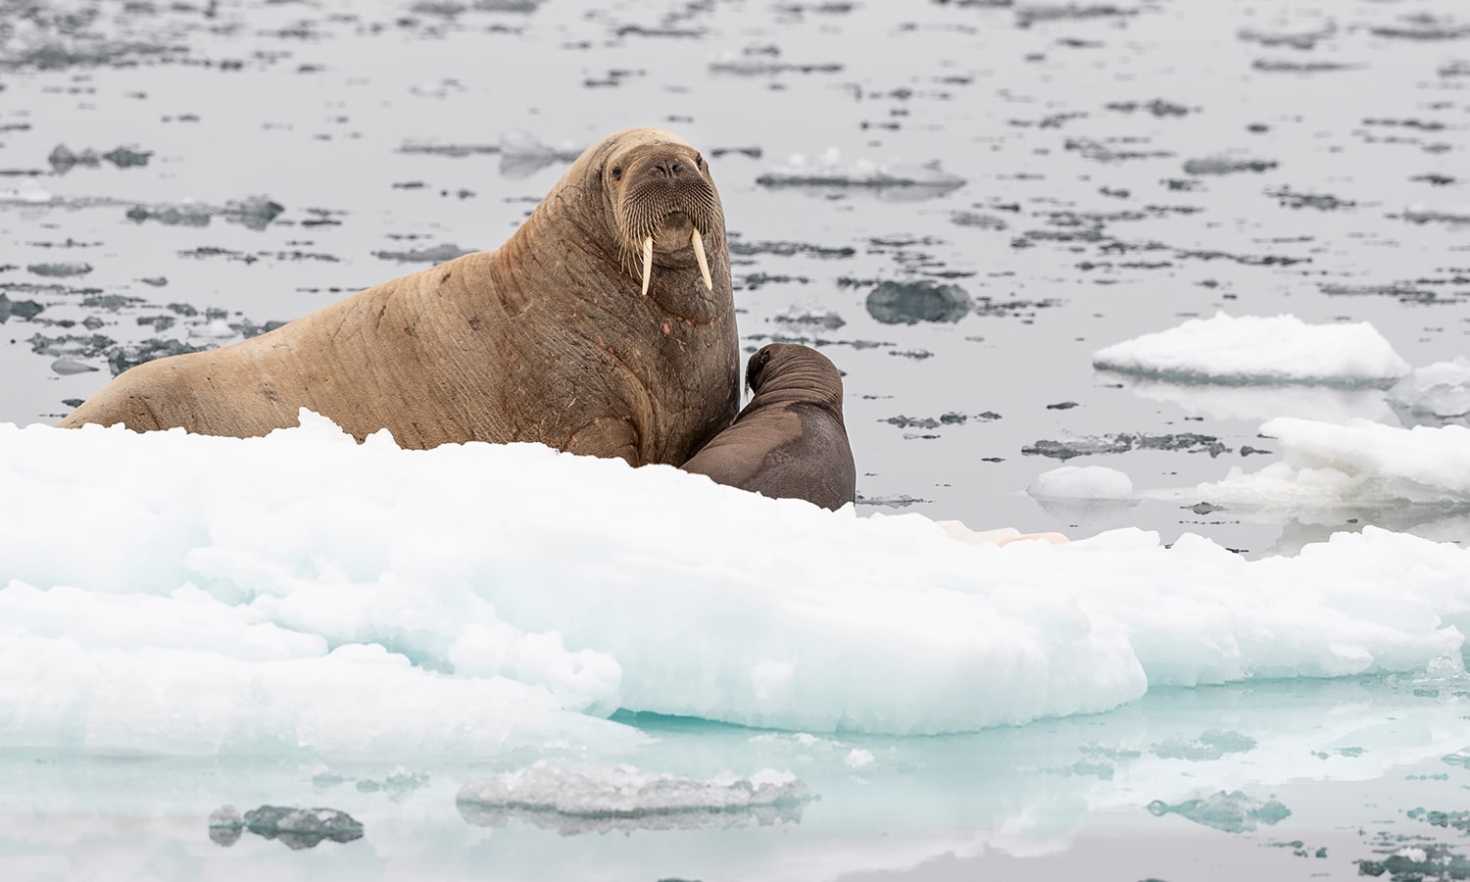 A female walrus and its young offspring on an ice floe (photo credit Richard Barrett/WWF-UK)